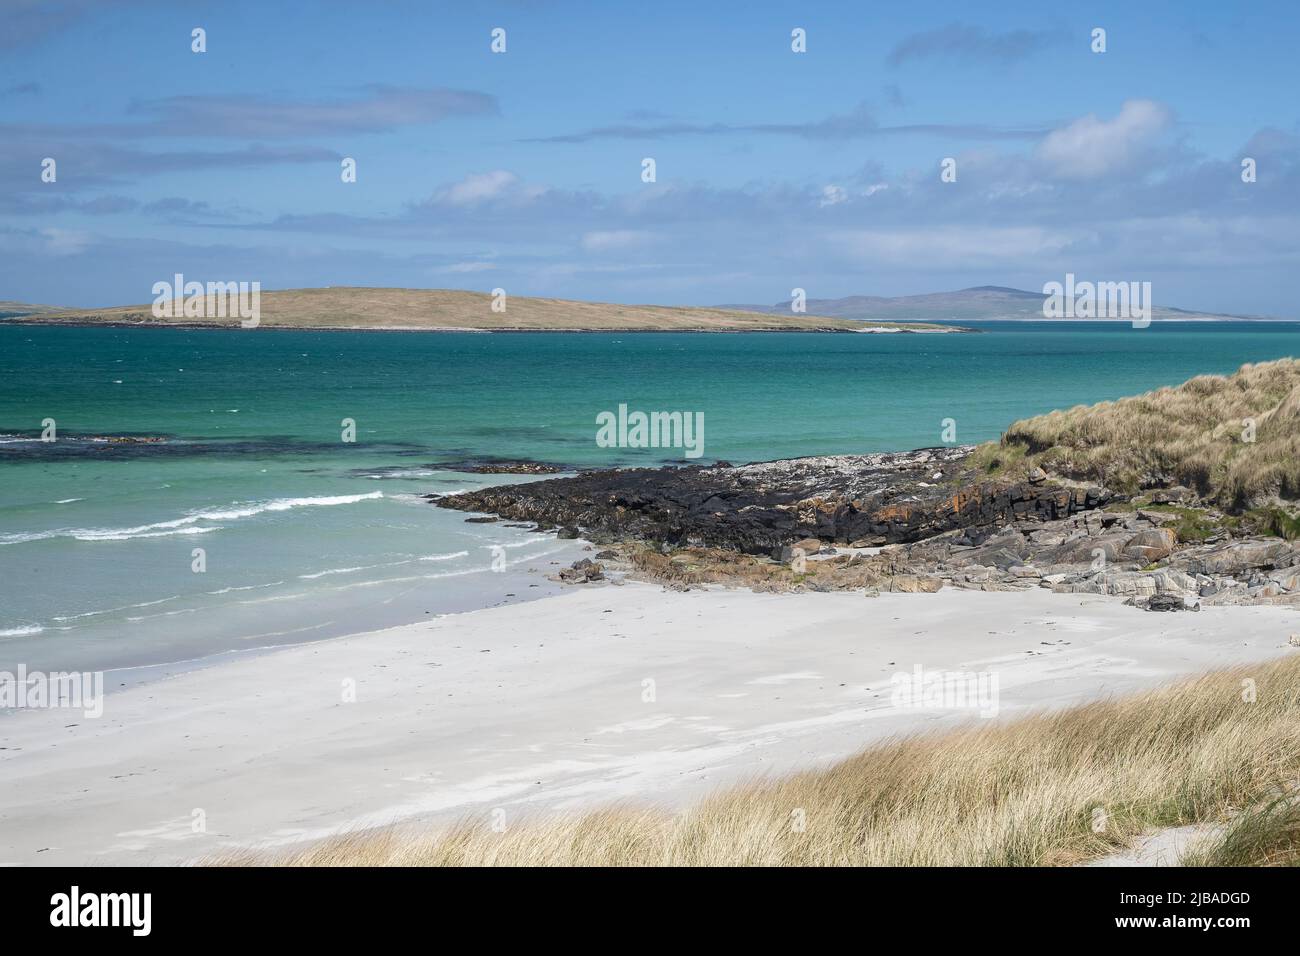 The sand dunes, white sands and aqua sea colours at Clachan Sands on North Uist, Outer Hebrides, Scotland Stock Photo